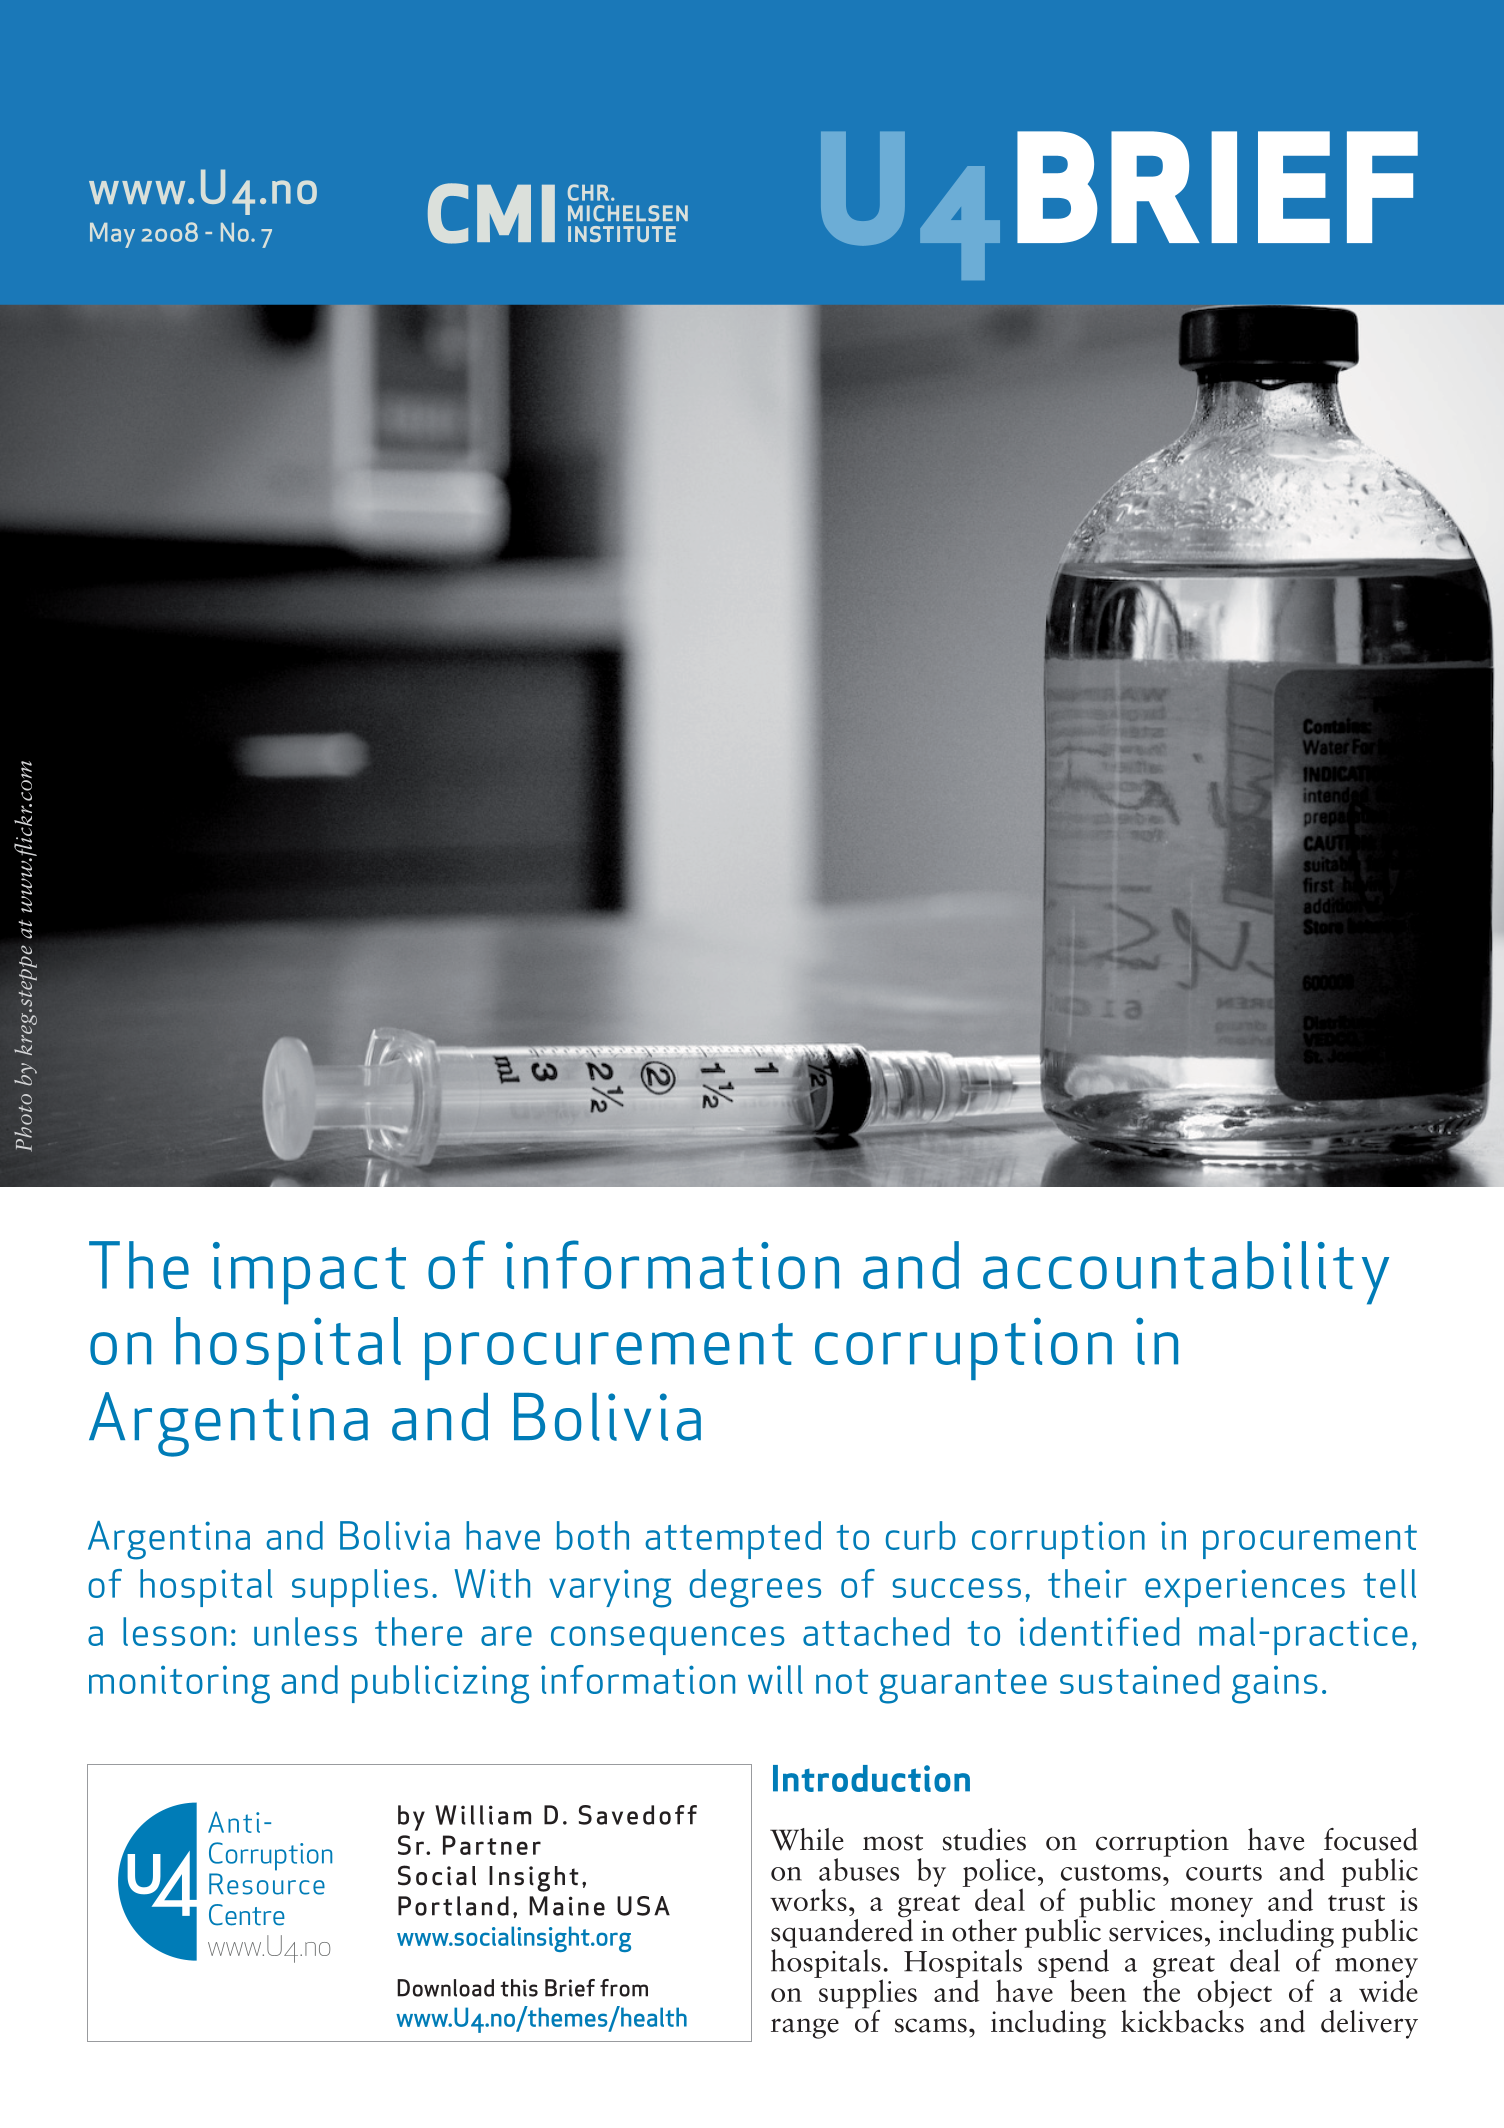 The impact of information and accountability on hospital procurement corruption in Argentina and Bolivia